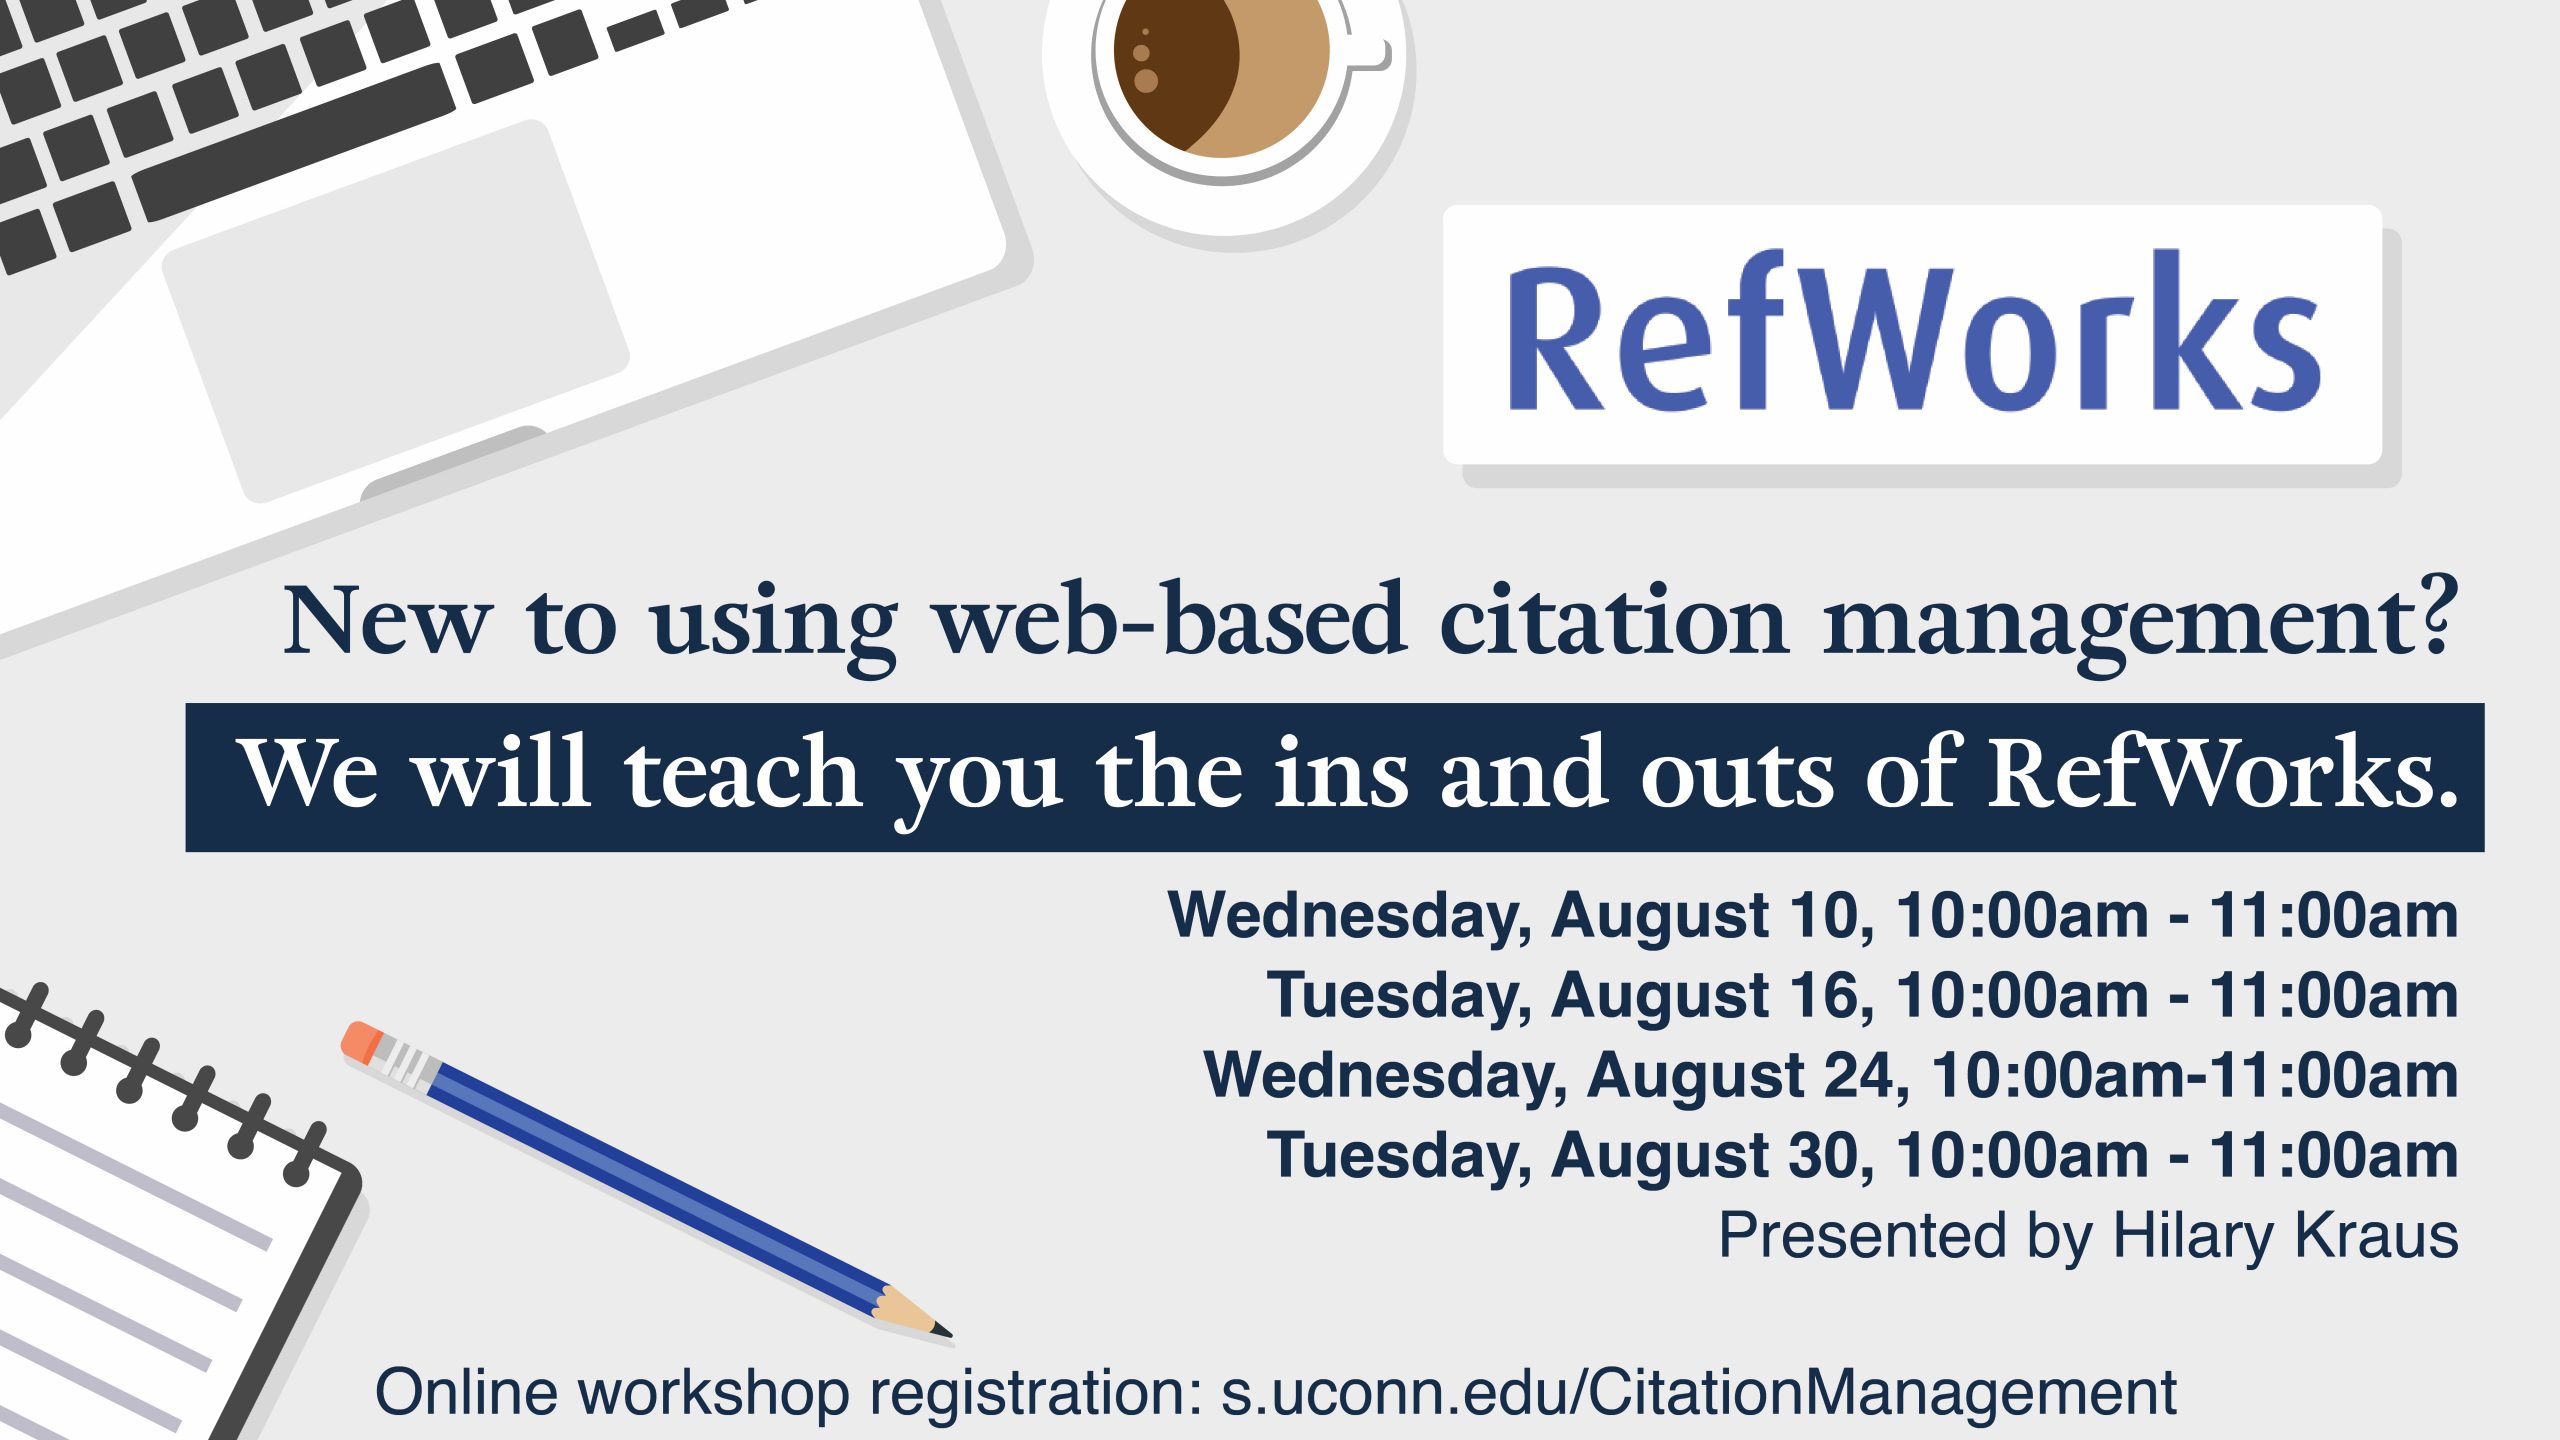 Marketing image with graphics that look like items on a desk and the text: New to using web-based citation management? We will teach you the ins and outs of RefWorks. Wednesday, August 10, 10:00am - 11:00am Tuesday, August 16, 10:00am - 11:00am Wednesday, August 24, 10:00am-11:00am Tuesday, August 30, 10:00am - 11:00am Presented by Hilary Kraus Online workshop registration: s.uconn.edu/CitationManagement